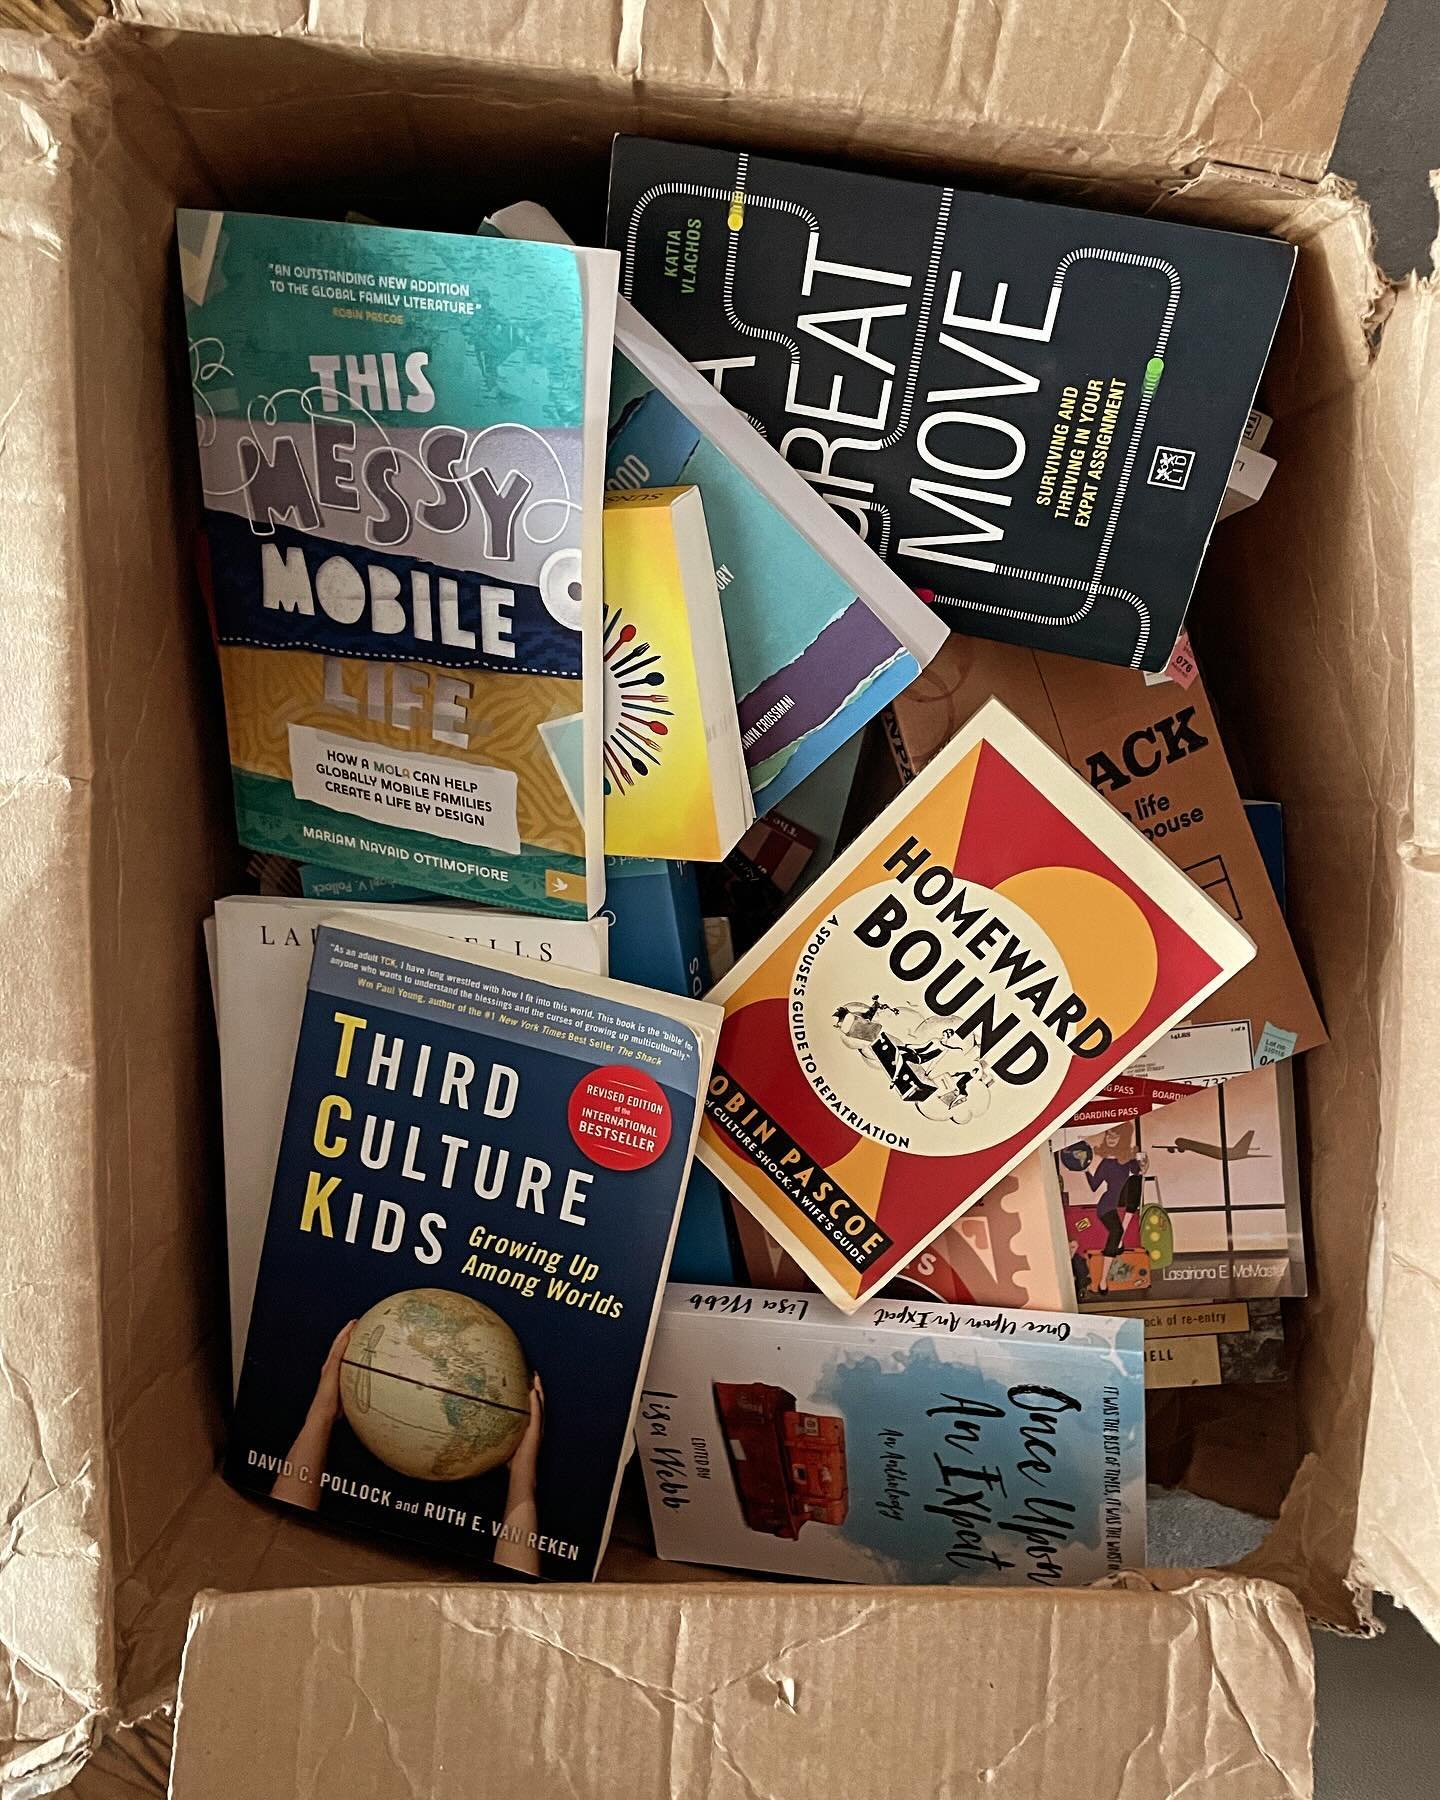 I found this box on my doorstep just in time for #worldbookday2024! 

What a thrill to find loads of books I&rsquo;ve been meaning to read or reread, as well as one I contributed to a lifetime ago, that were gifted to me by a dear colleague and frien